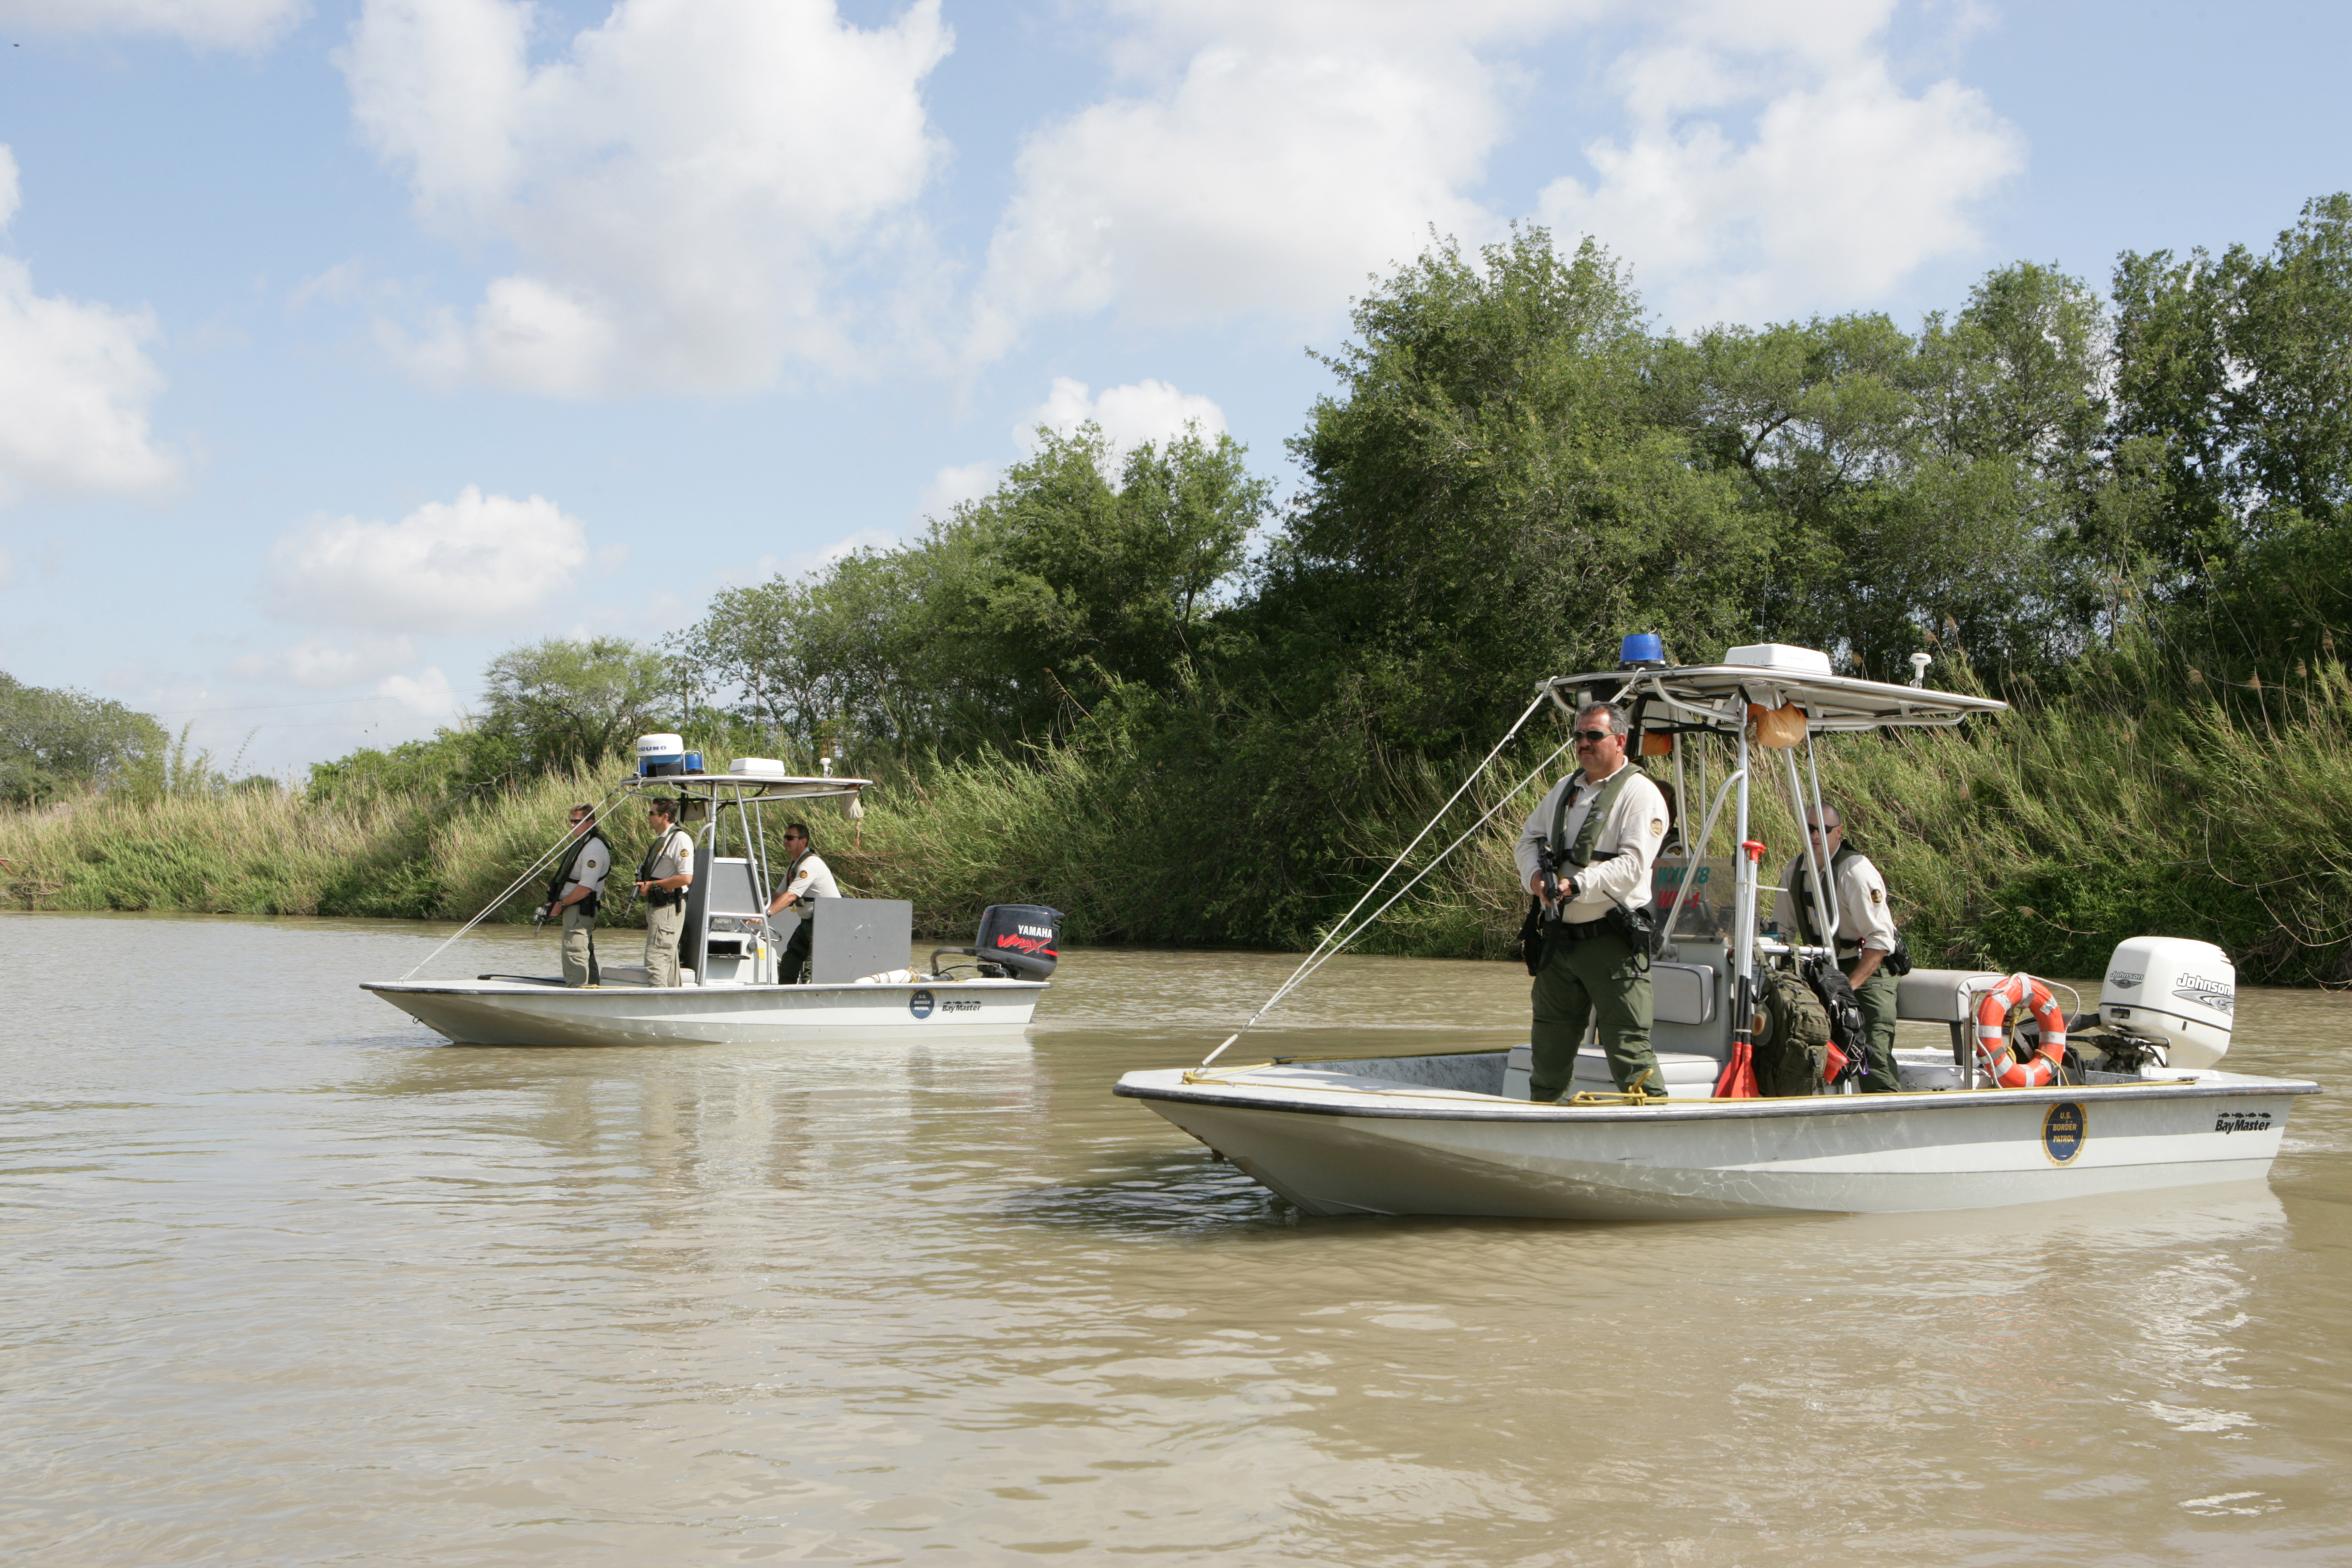 U.S. Border Patrol Marine units face toward Mexico to provide cover for other agents on the U.S. side of the river conducting an investigation.